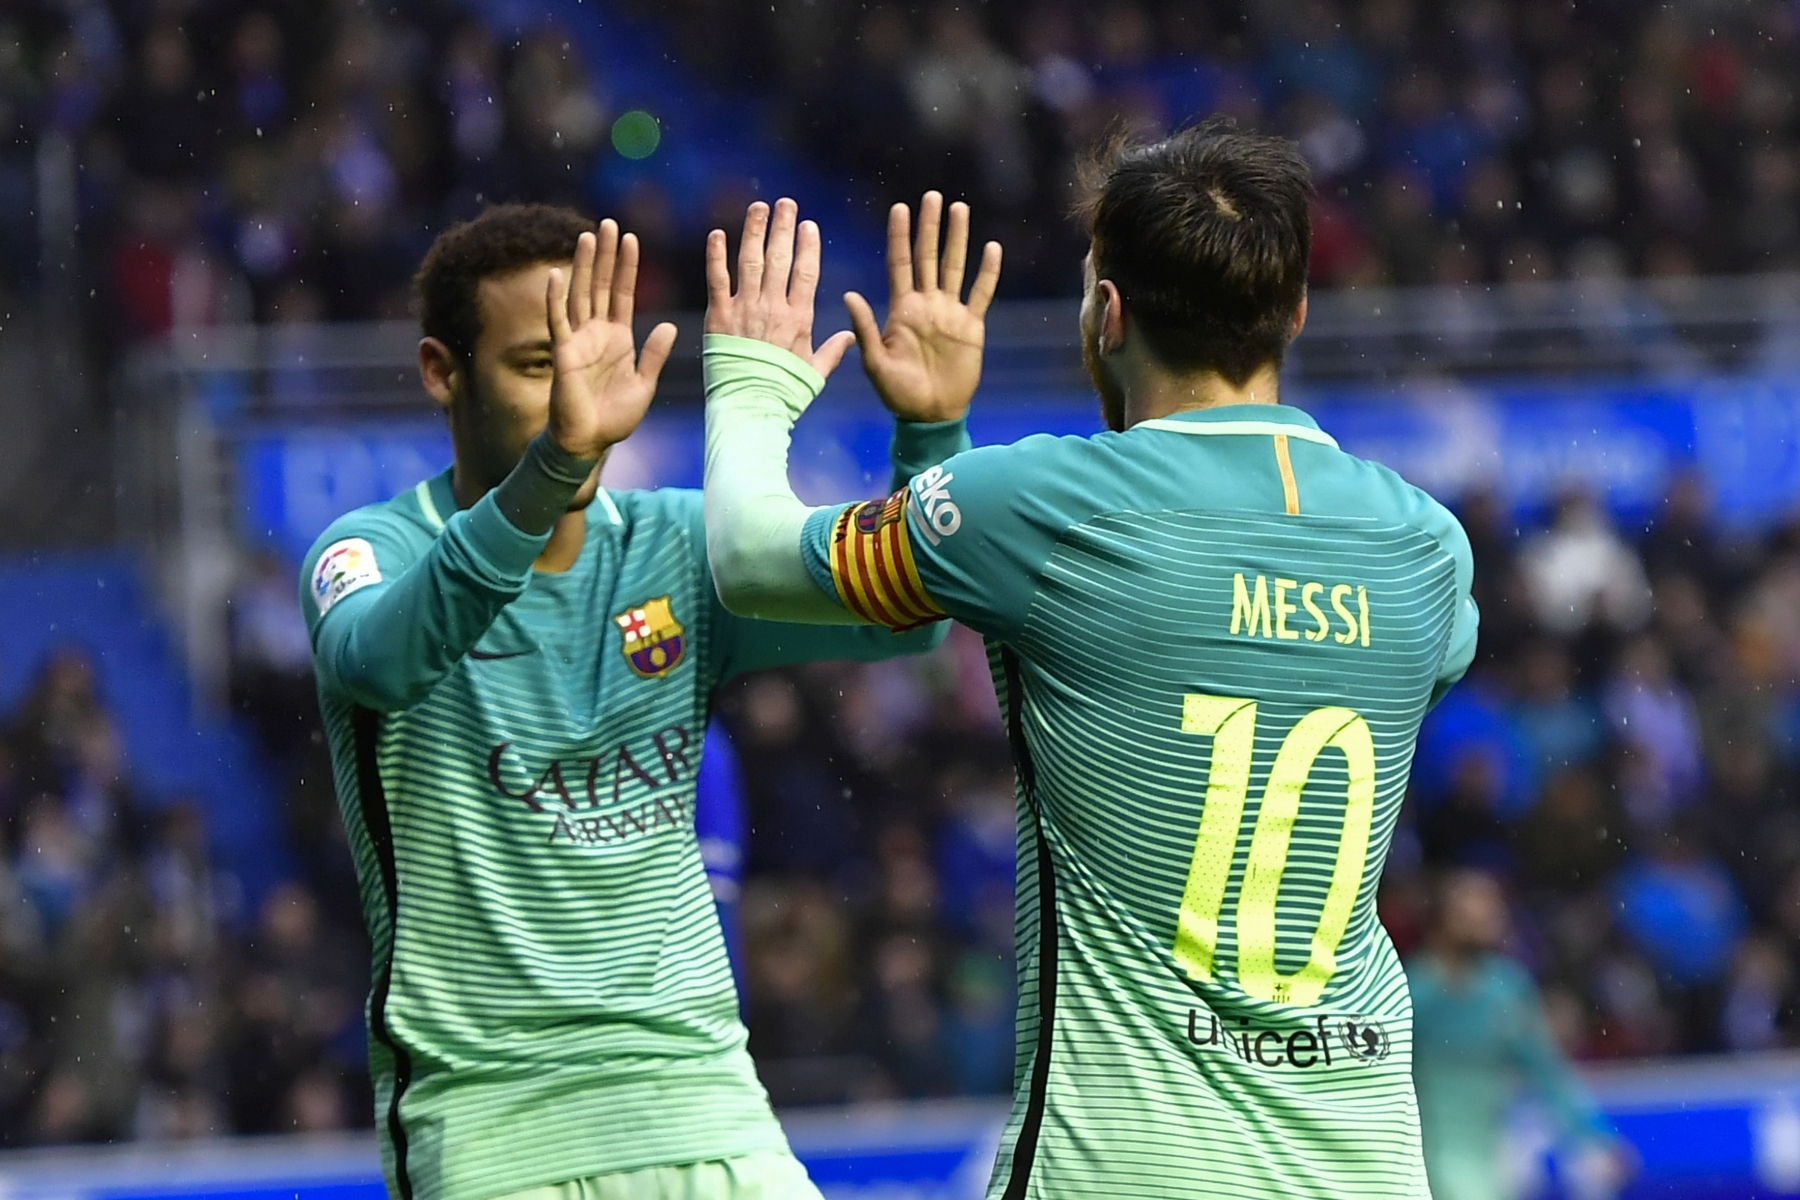 FC Barcelona's Neymar Jr. celebrates with his teammate Lionel Messi, after Messi scored during the Spanish La Liga soccer match between Barcelona and Deportivo Alaves, at Mendizorroza stadium, in Vitoria, northern Spain, Saturday, Feb.11, 2017. (AP Photo/Alvaro Barrient